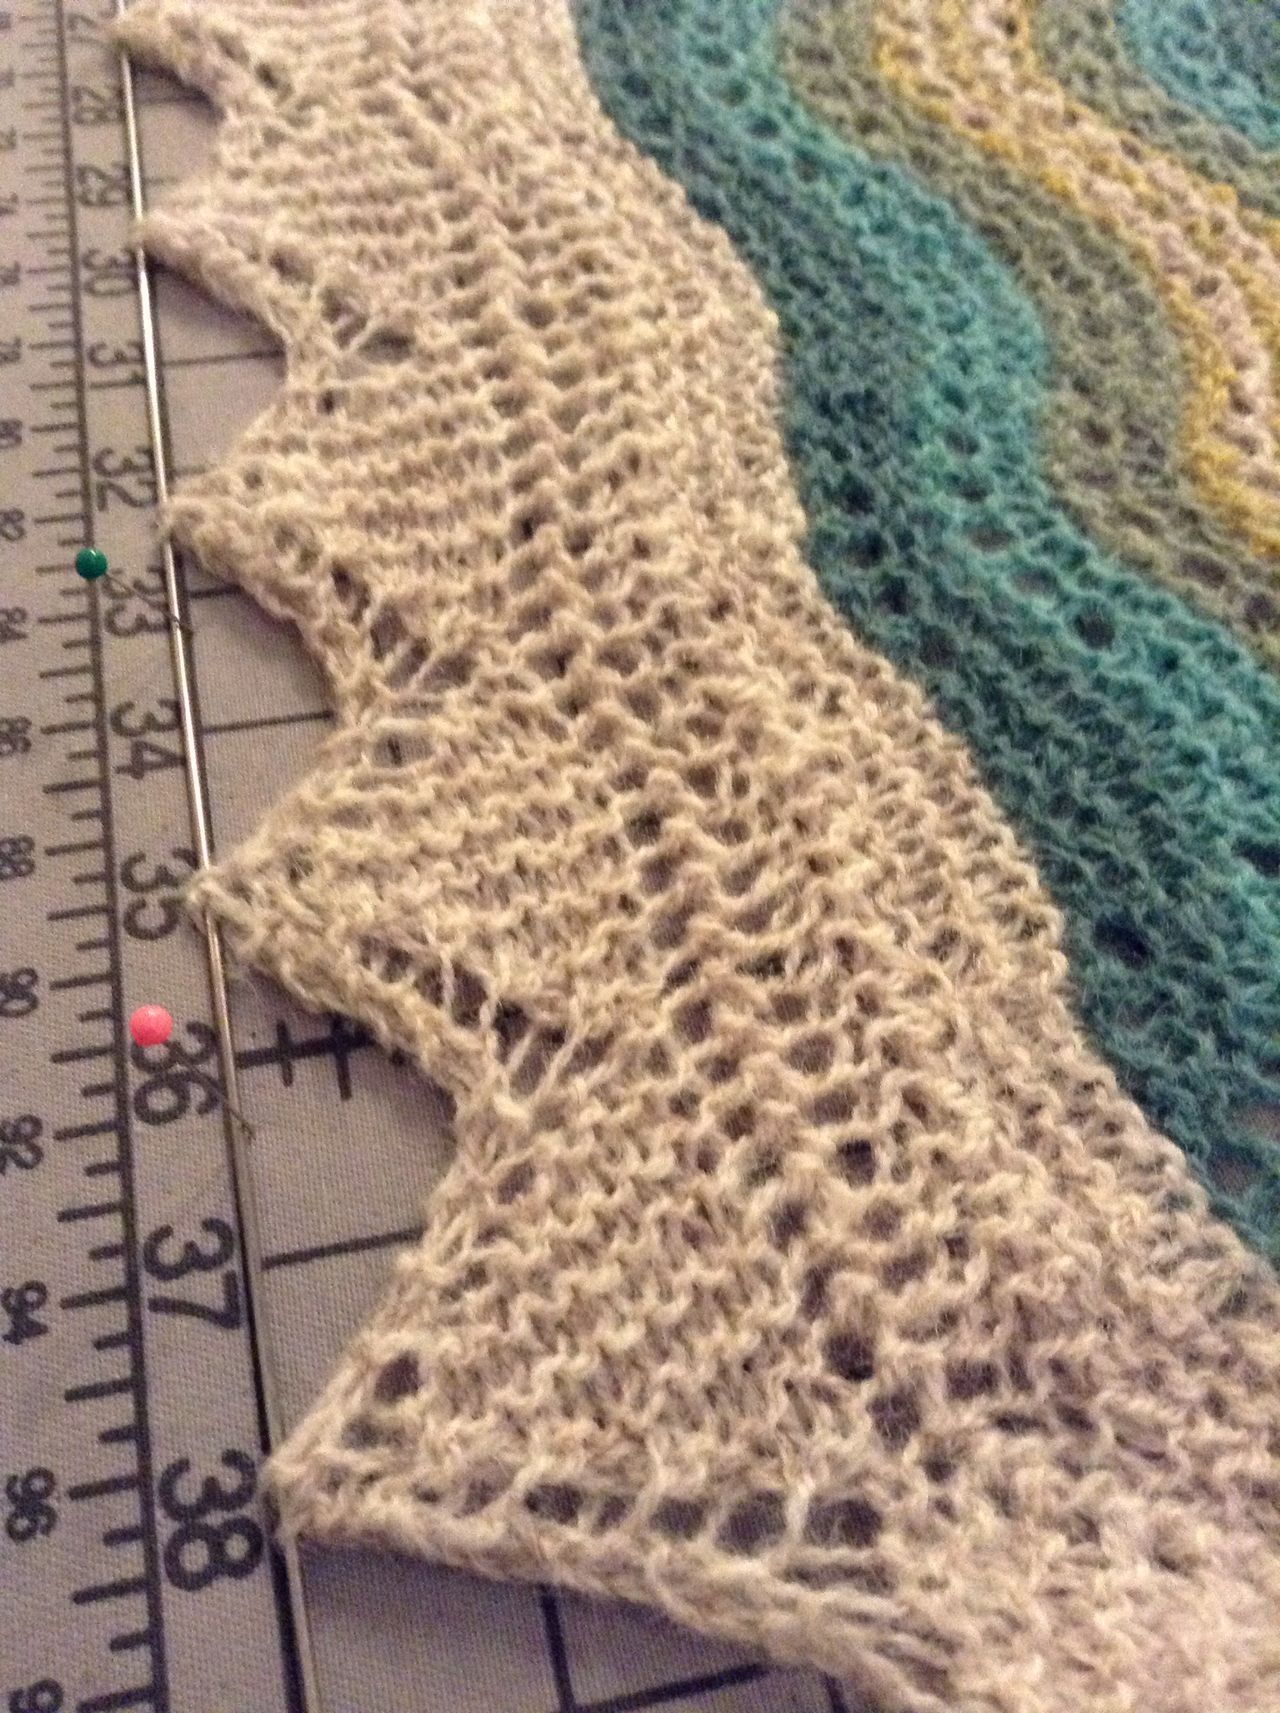 (5) Thread points of lace edging through blocking wire